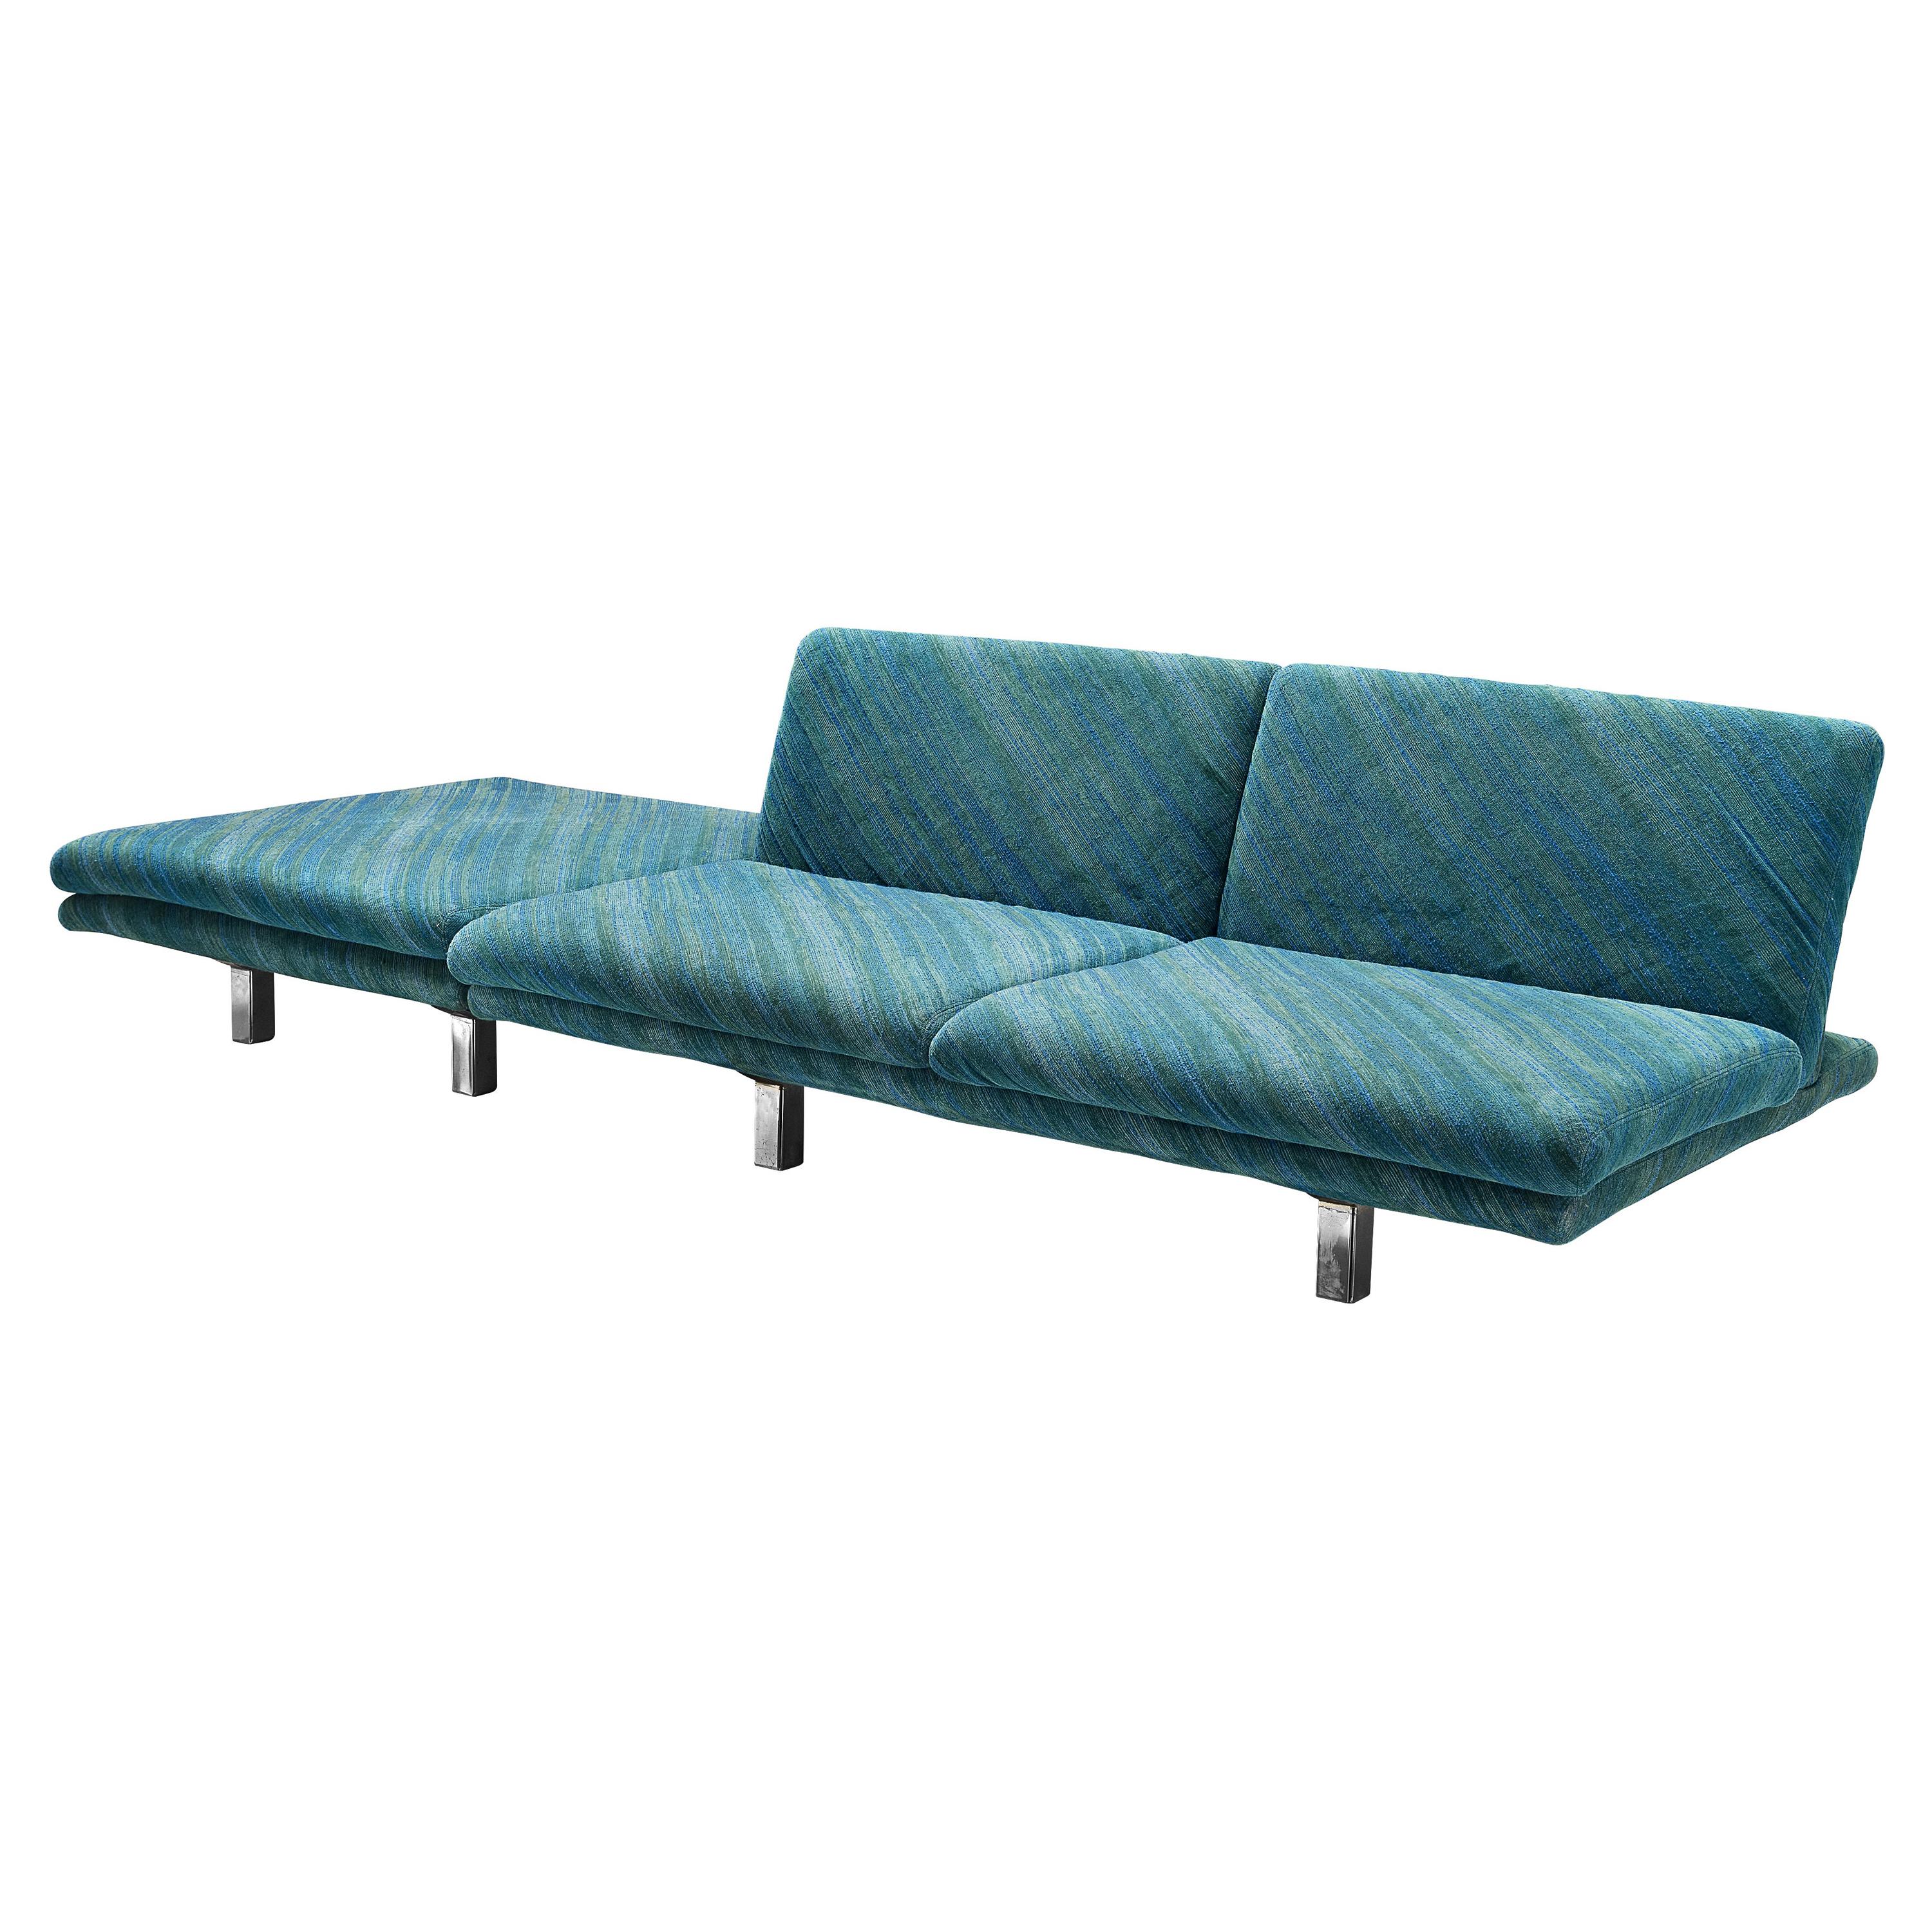 Saporiti Two Seat Sofa with Ottoman in Green-Blue Upholstery 